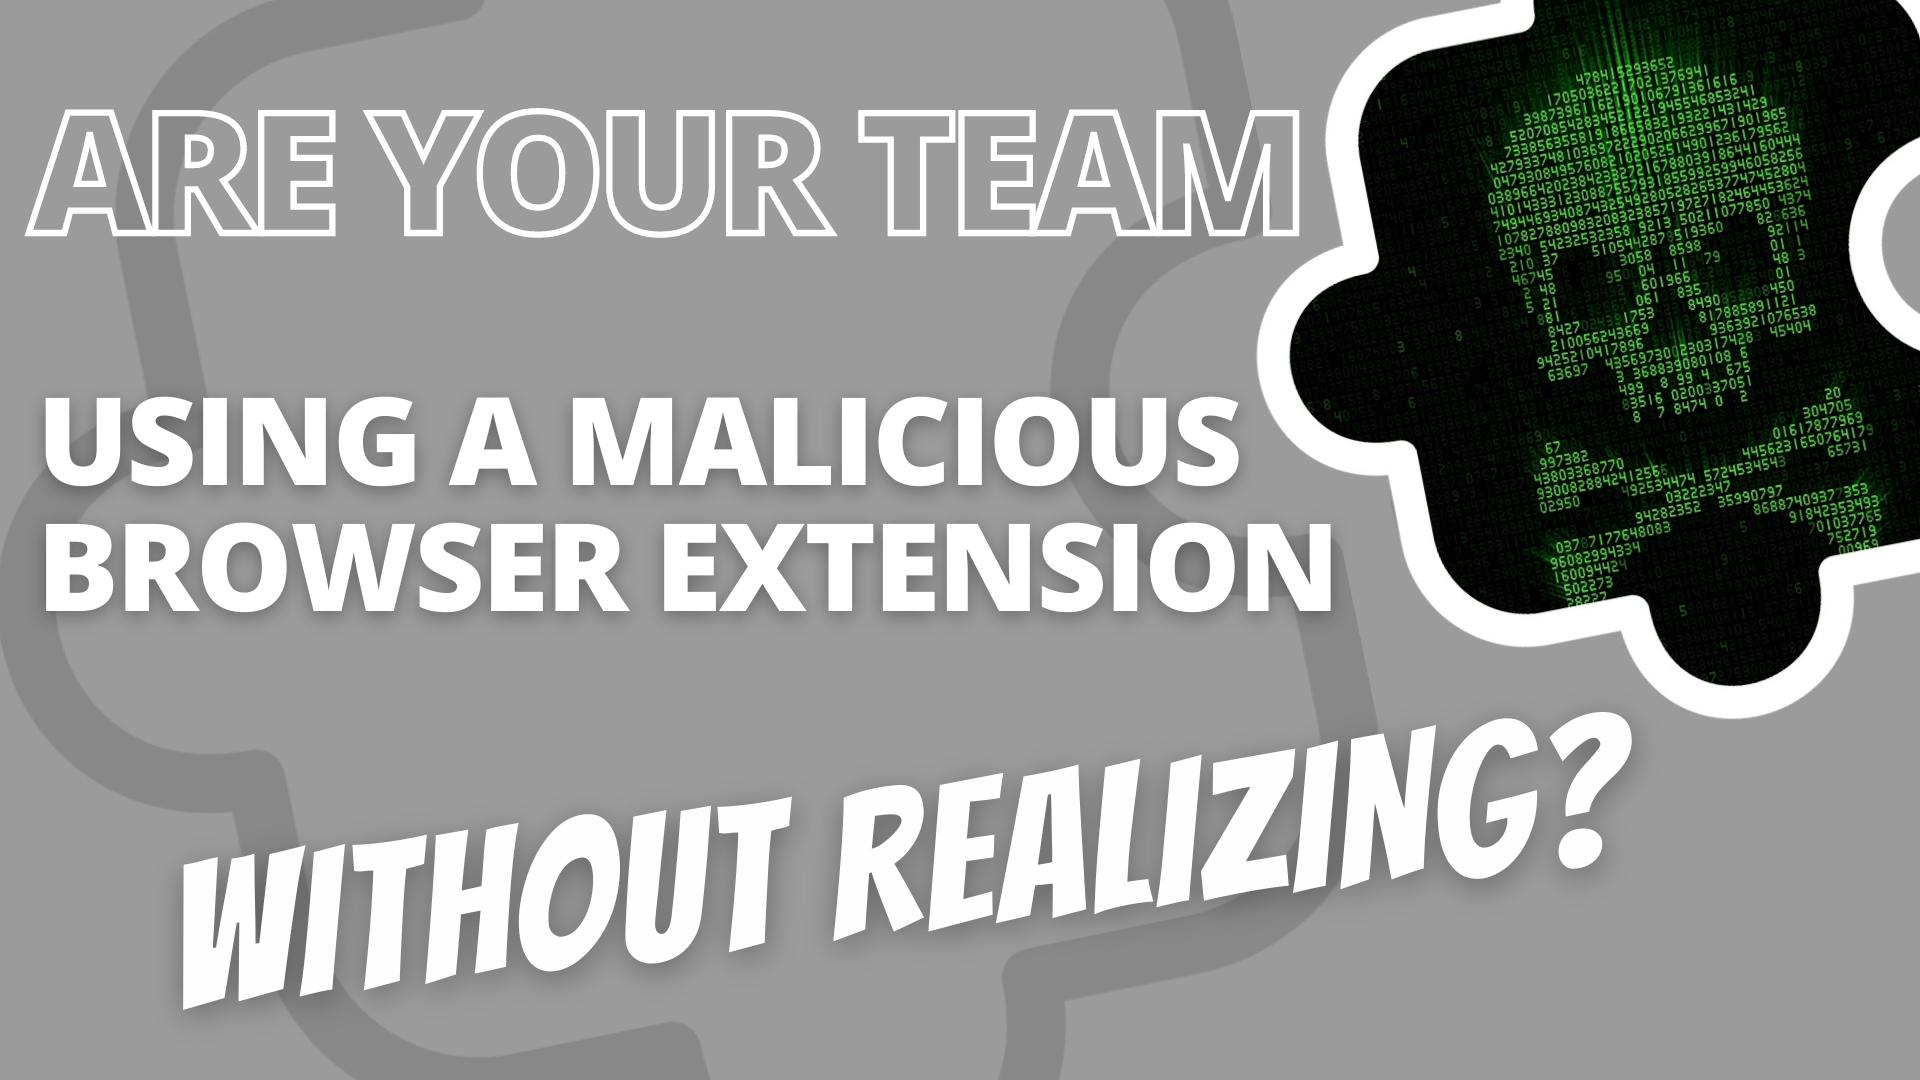 Are you using a malicious browser extension without realizing it? 